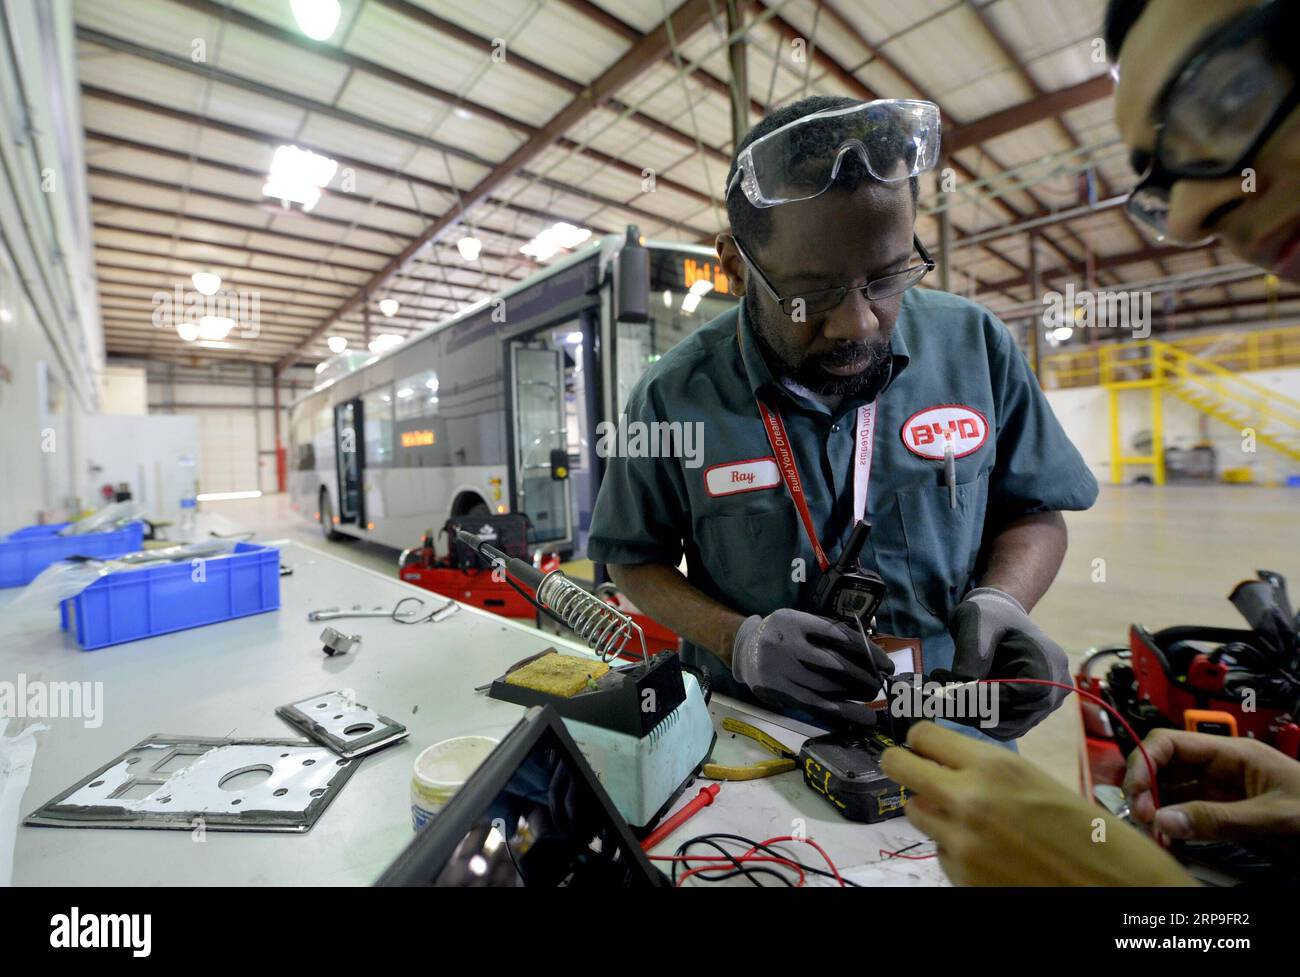 (190405) -- NEW YORK, April 5, 2019 (Xinhua) -- File photo taken on April 29, 2015 shows an engineer examining the circuit of an electric bus at BYD s manufacturing plant in Lancaster, Los Angeles County, the United States. China s leading electric vehicle maker BYD held a ceremony on April 3 to celebrate its 300th bus at its Lancaster manufacturing plant in the U.S. state of California, marking a milestone for production. The 300th bus, a 35-foot BYD K9S model transit bus, is one of three built for the Capital Area Transit System of Baton Rouge, capital of the U.S. state of Louisiana, the com Stock Photo